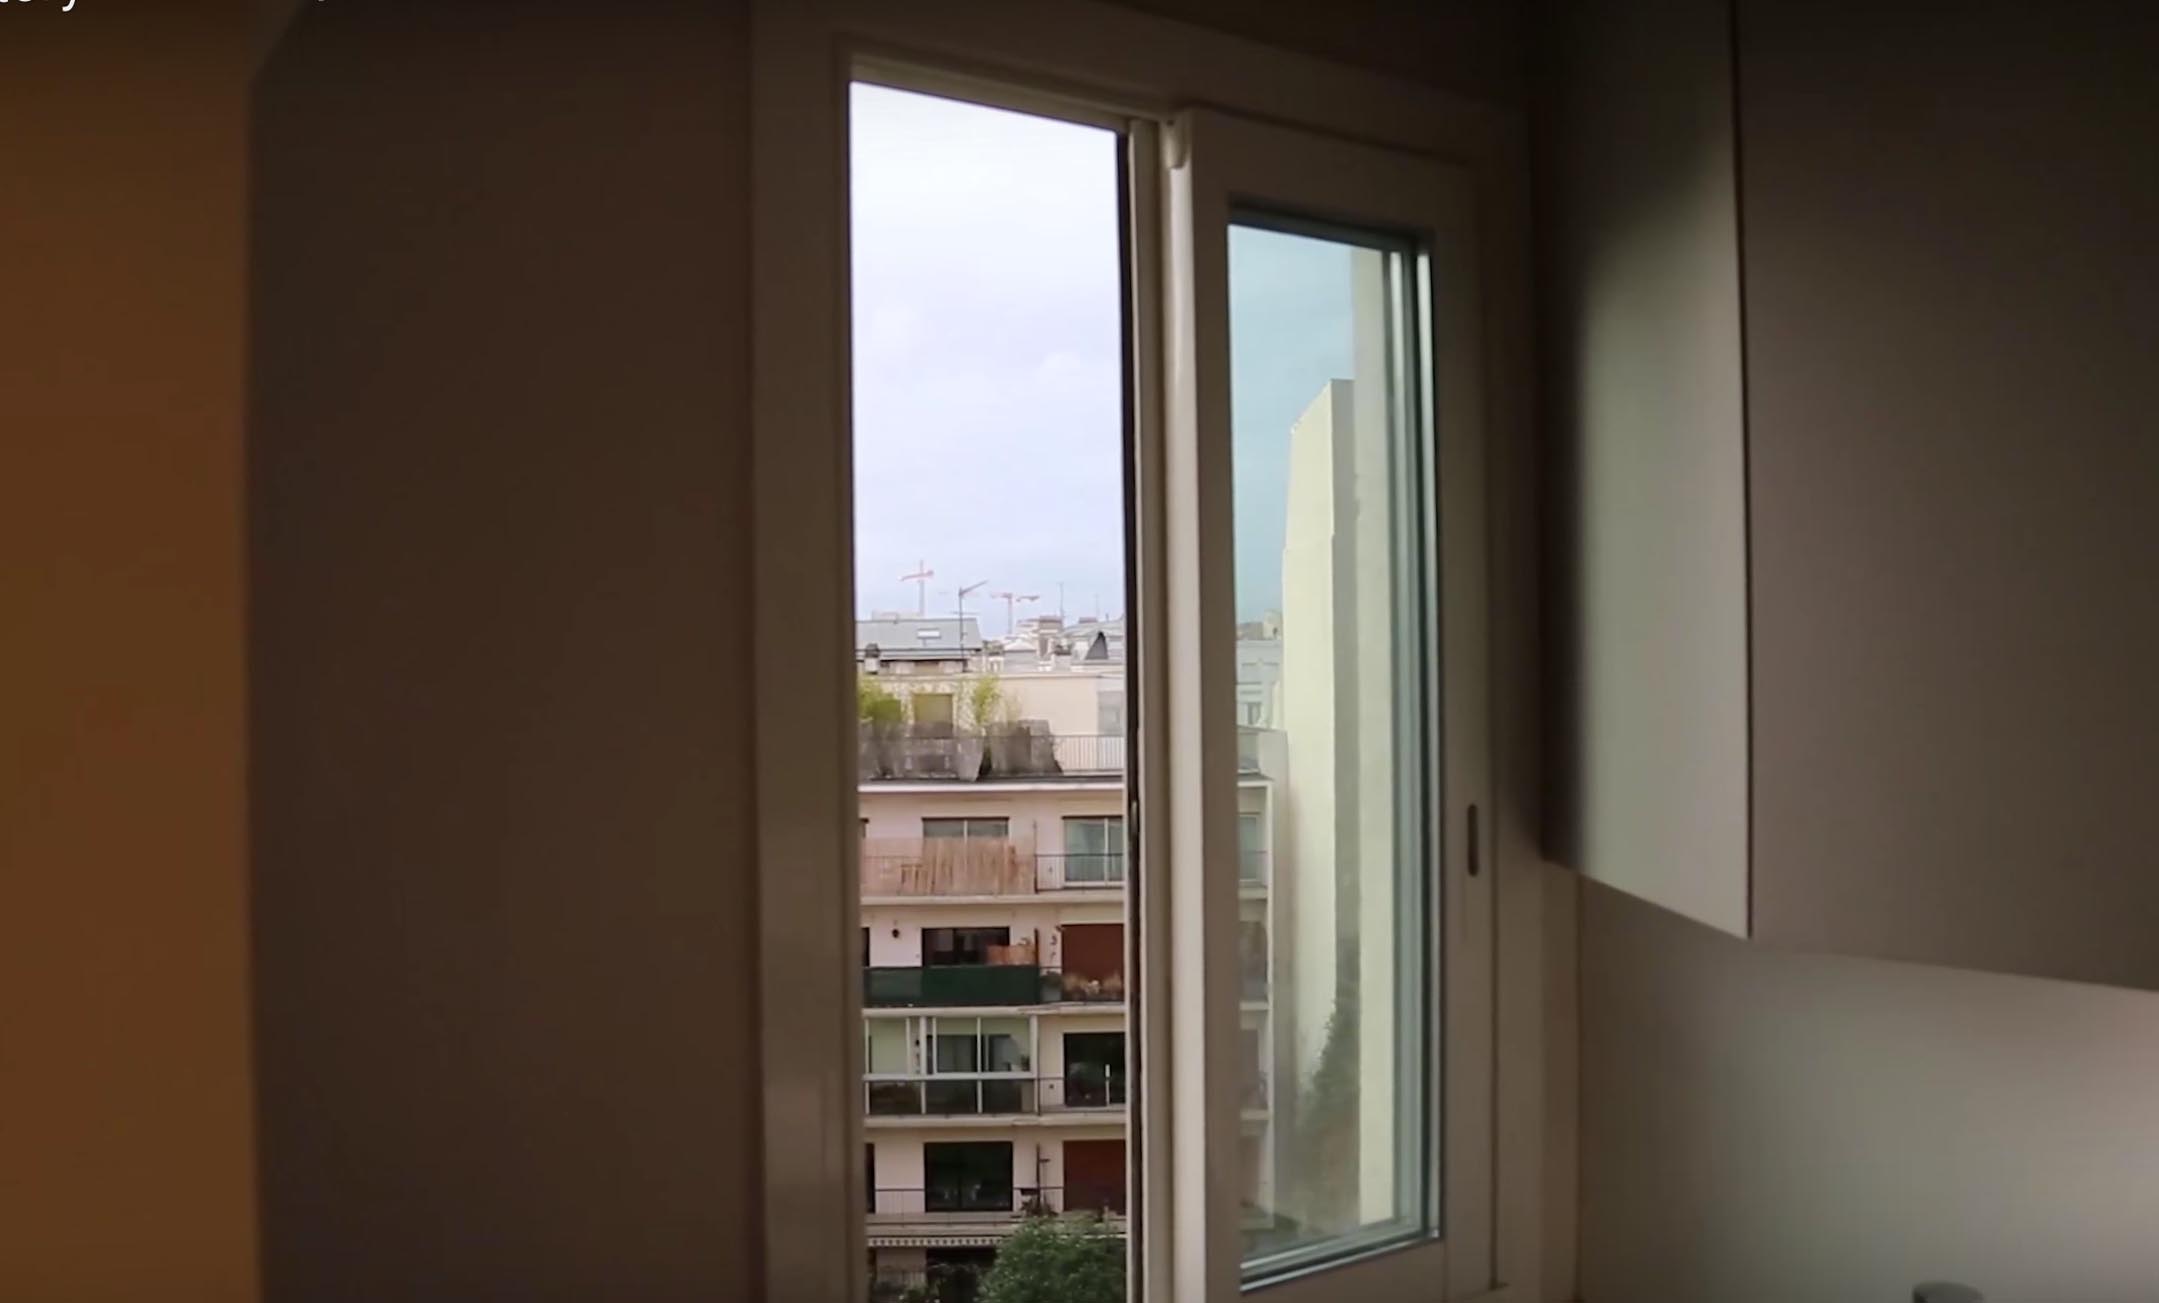 A daytime view from French Redditor Lurluberlu’s bedroom window in Paris, France shows apartments, not the Eiffel Towel.